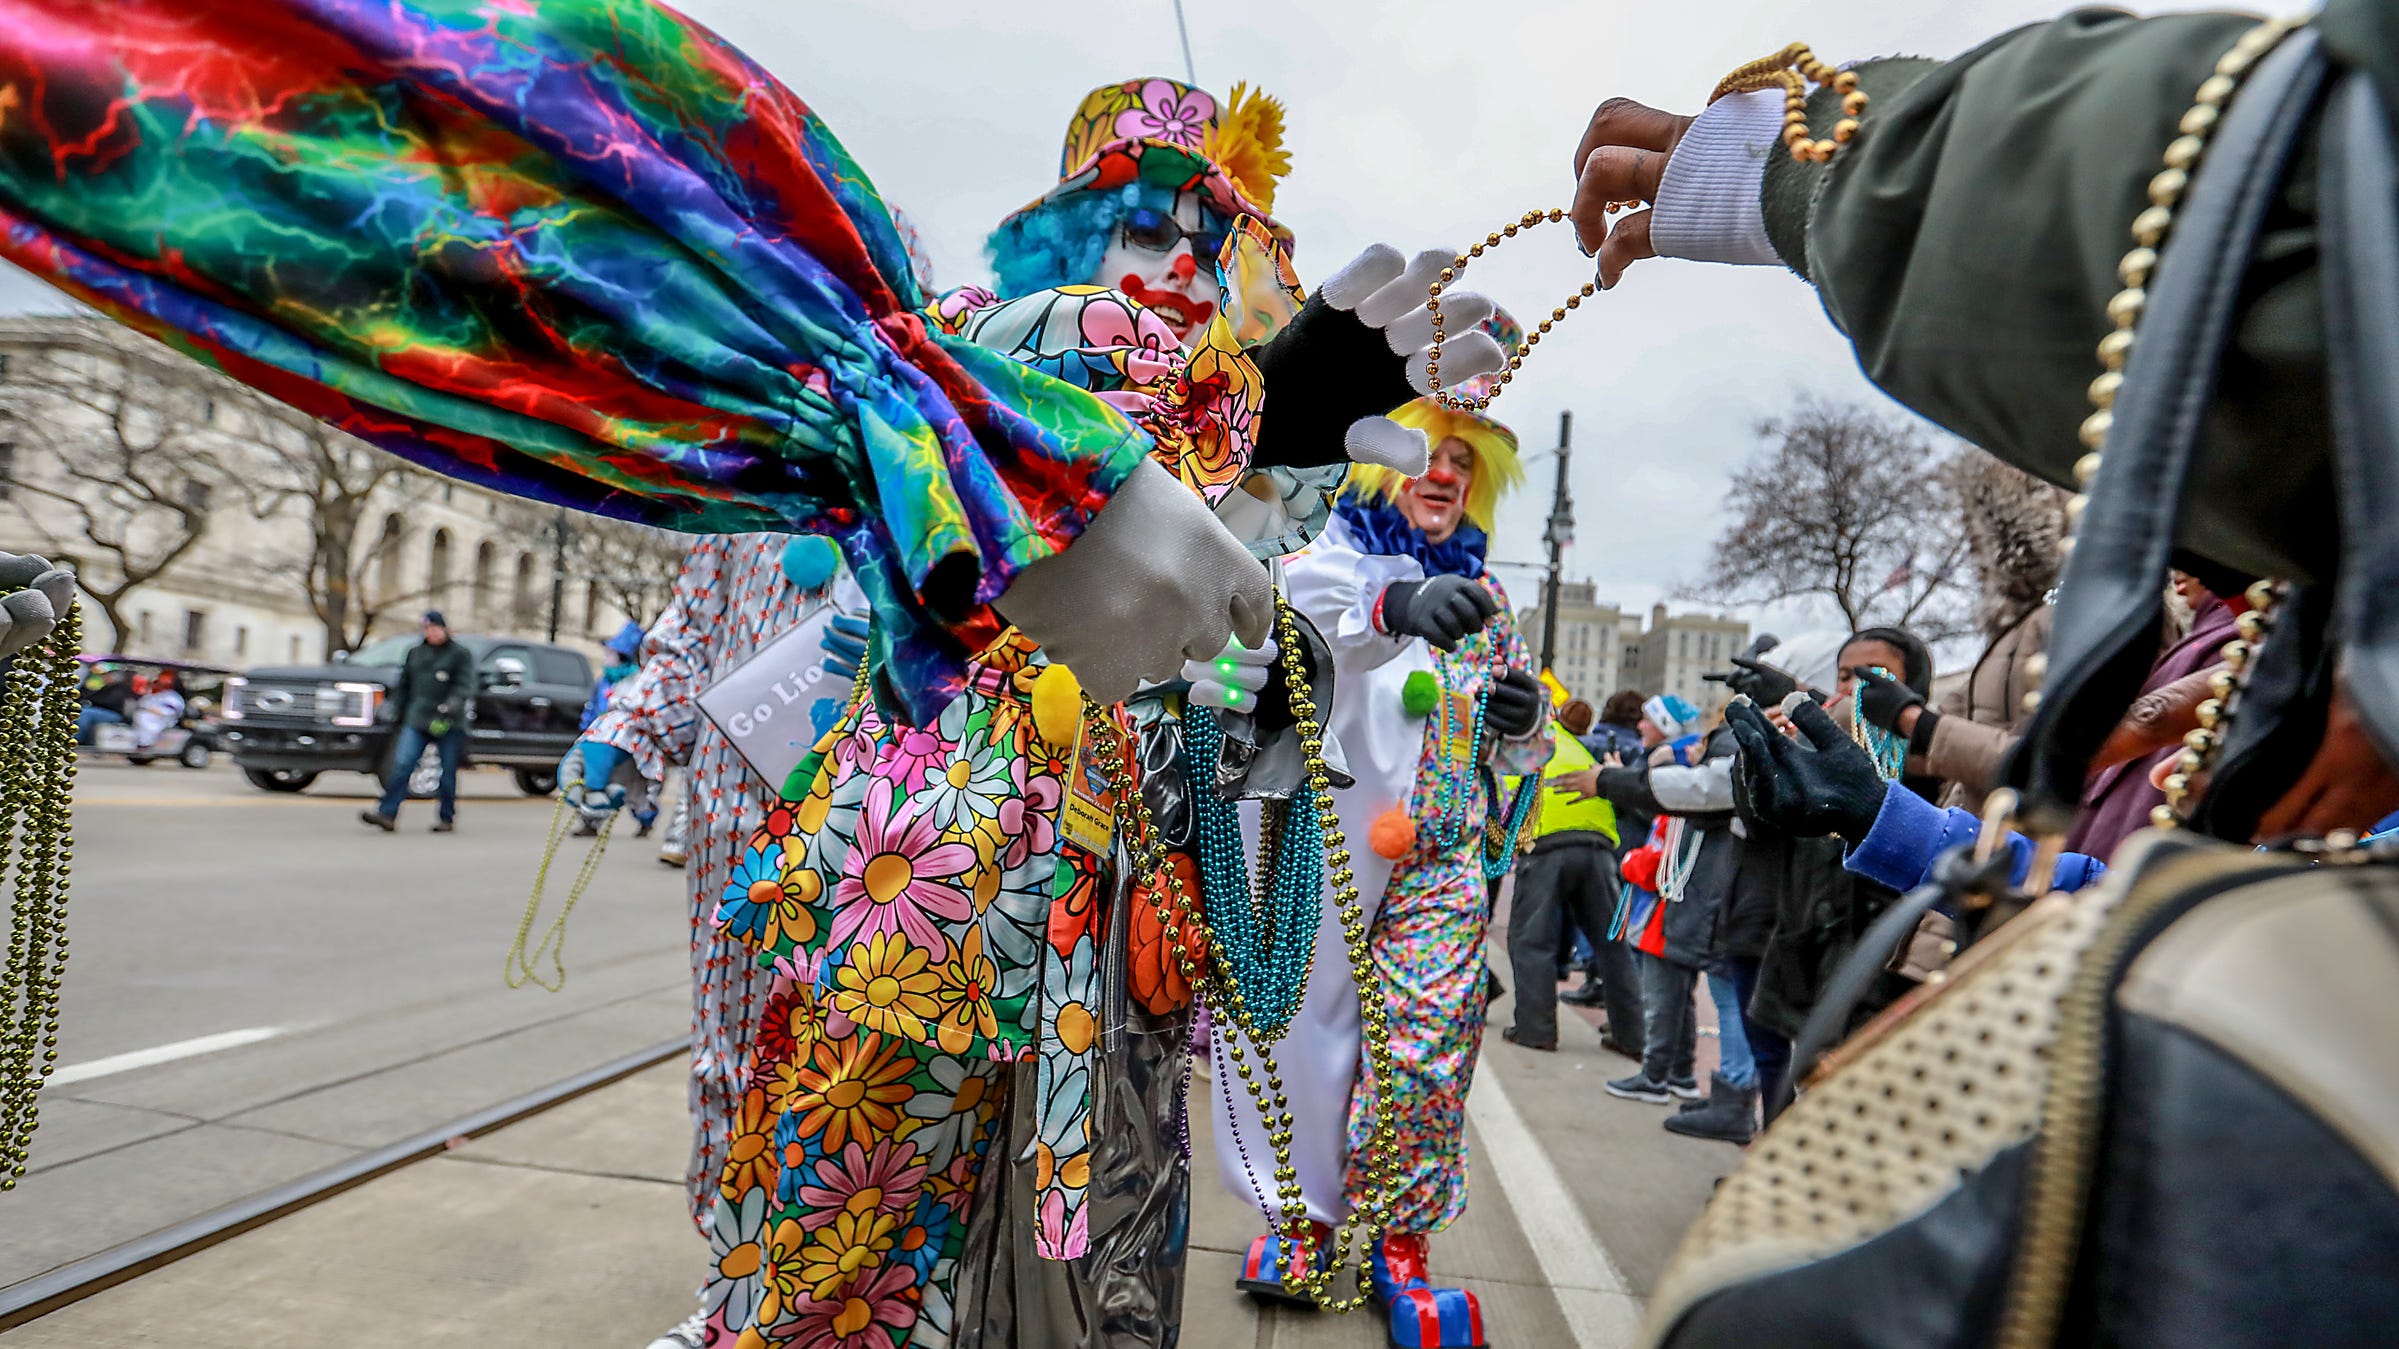 Detroit Thanksgiving parade brings floats, goats, tradition